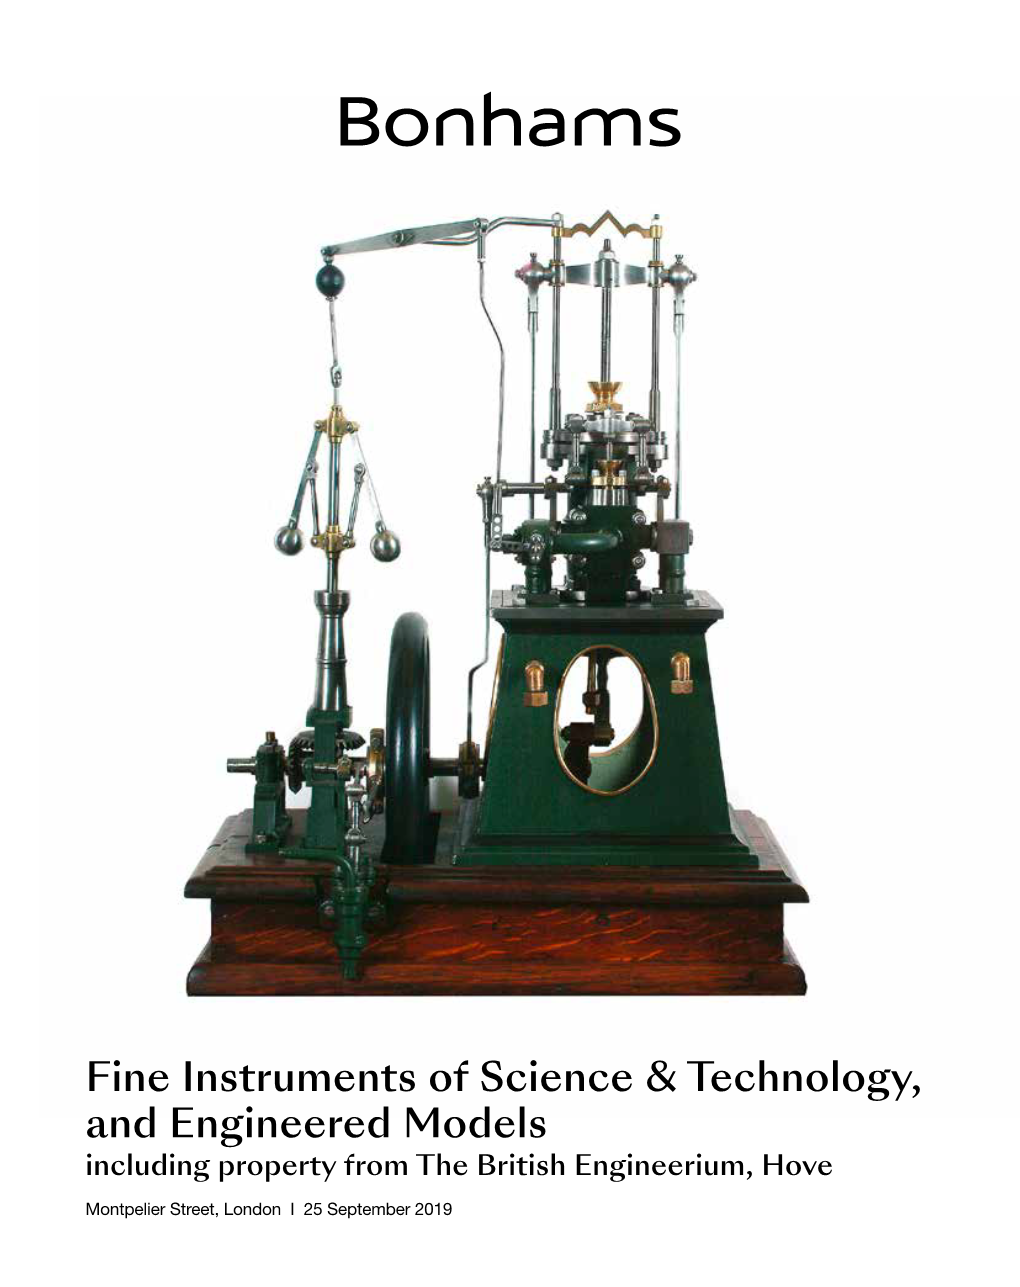 Fine Instruments of Science & Technology, and Engineered Models